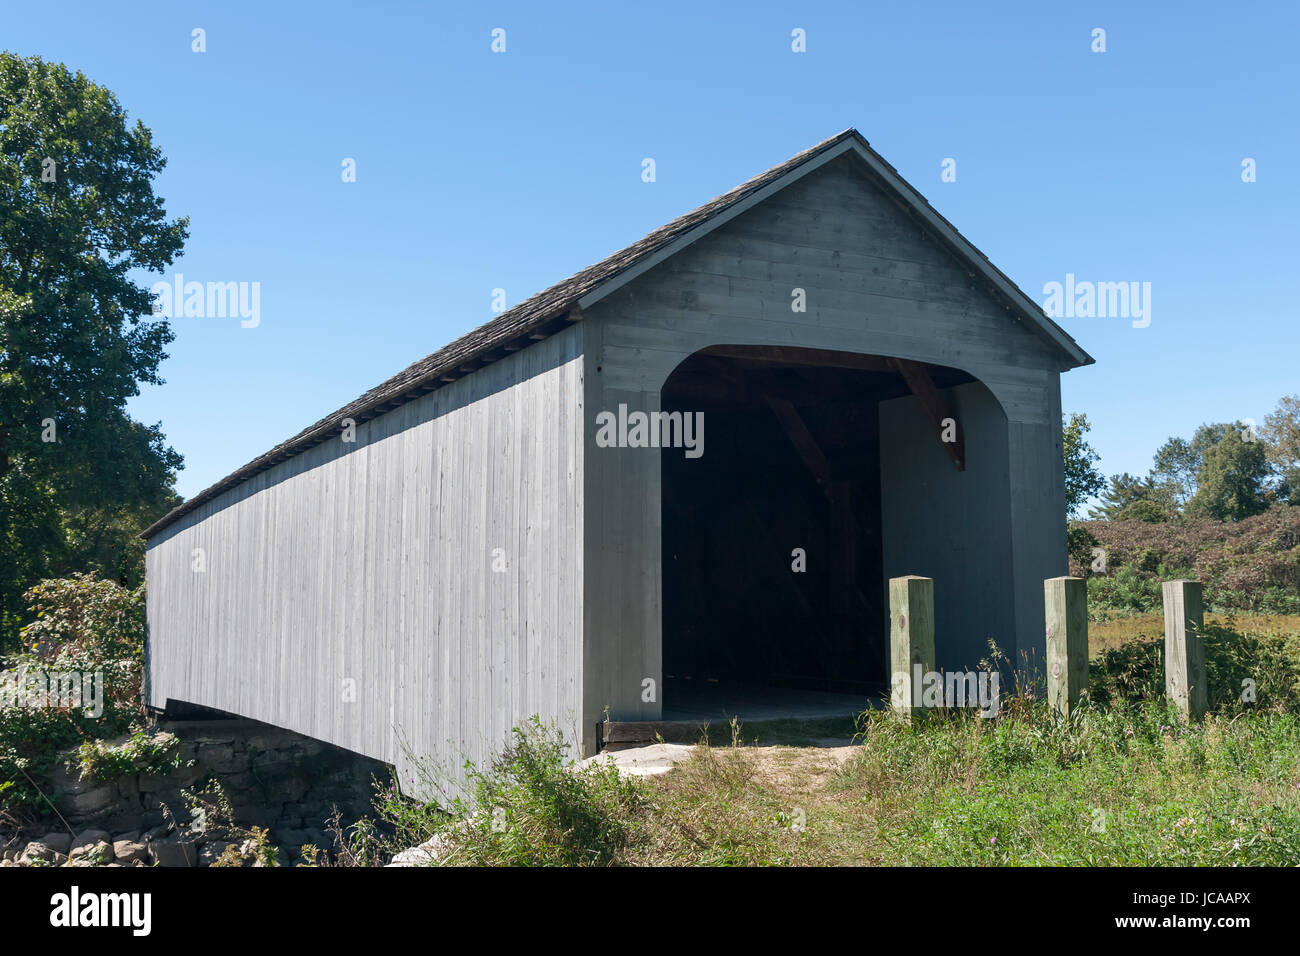 Old Covered bridge, 1854, oldest covered bridge in Sheffield, MA. Restored in 1998. 100 ft. spans Housatonic River. Natl. Register of Historic Places. Stock Photo